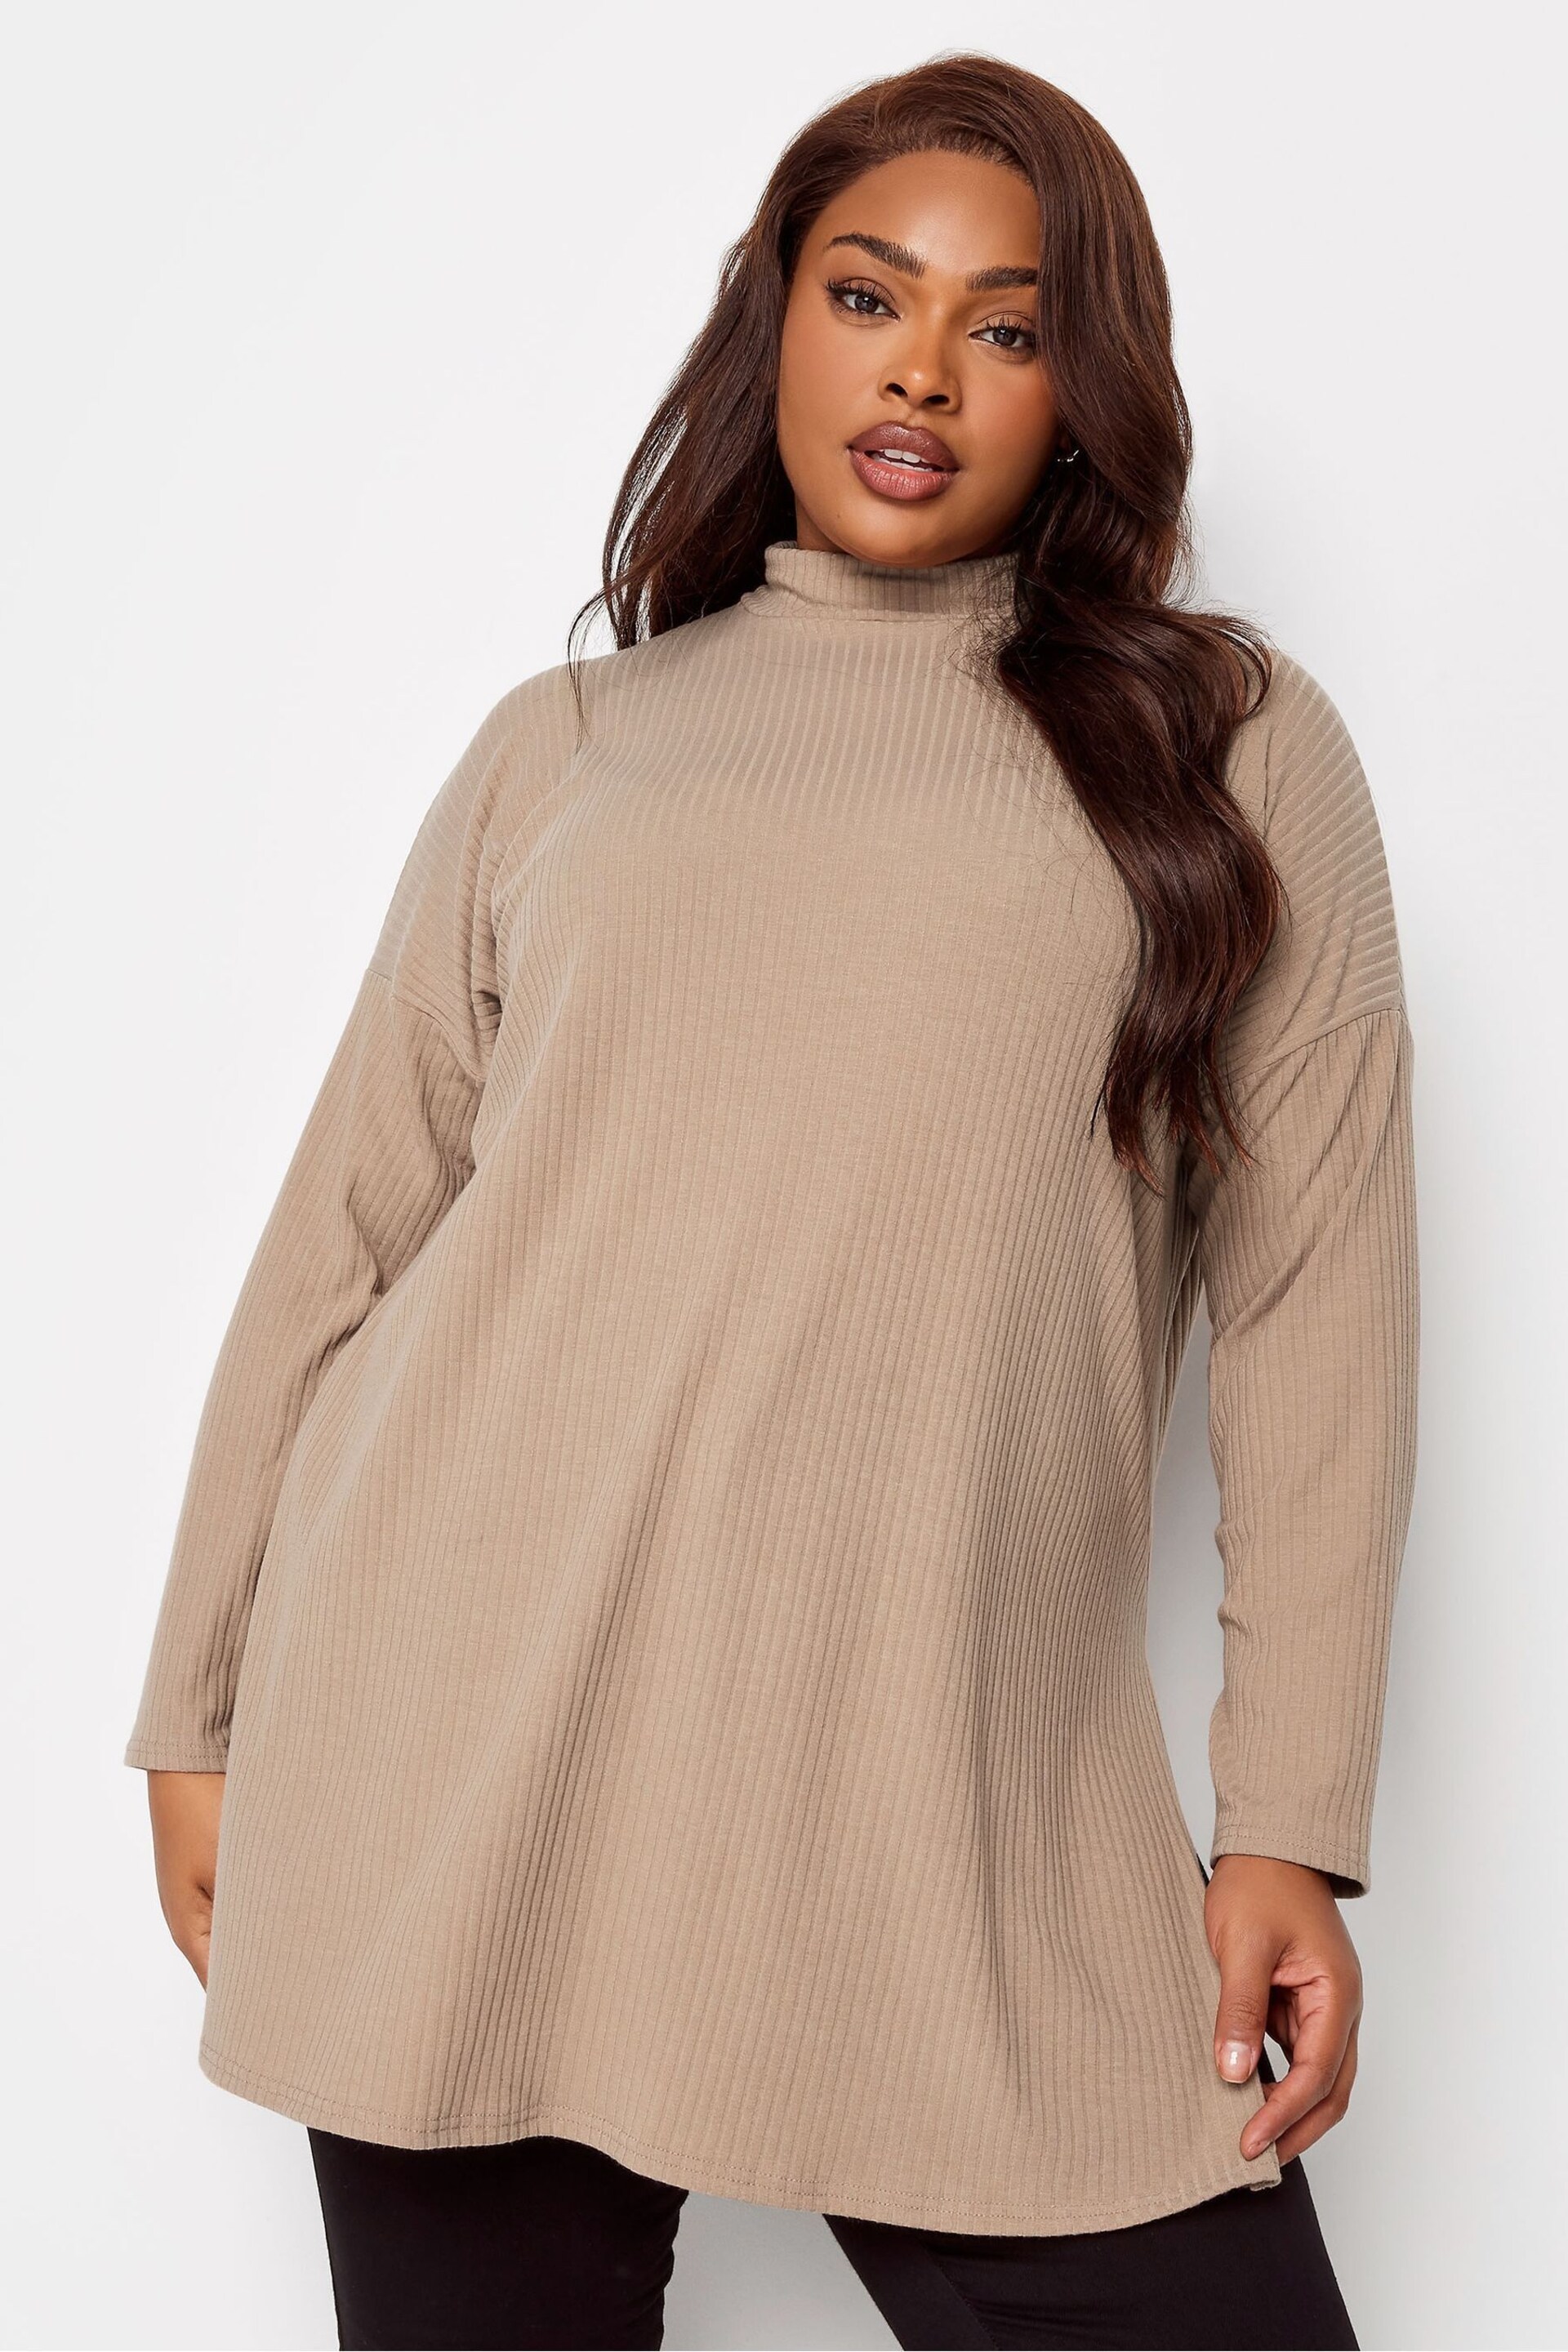 Yours Curve Natural Oversized Turtle Neck Ribbed Longsleeve T-Shirt - Image 1 of 4